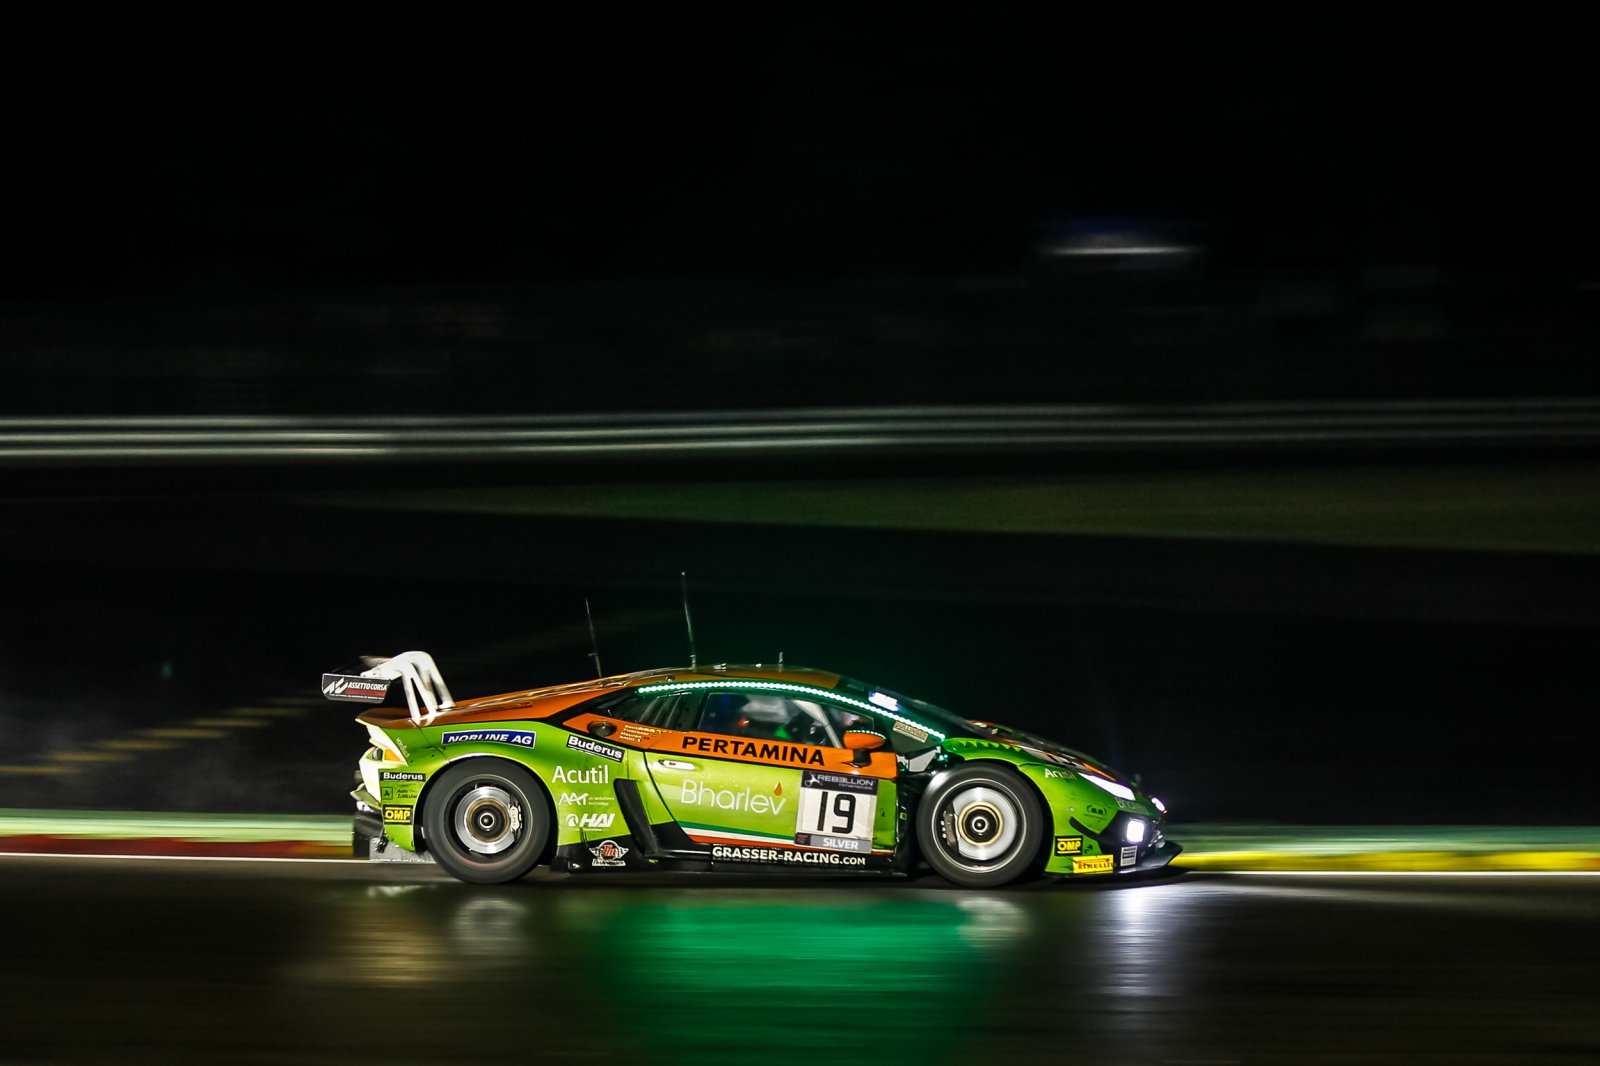 Lamborghini Juniors Zimmermann and Galbiati named as Grasser Racing's first line-up for 2021